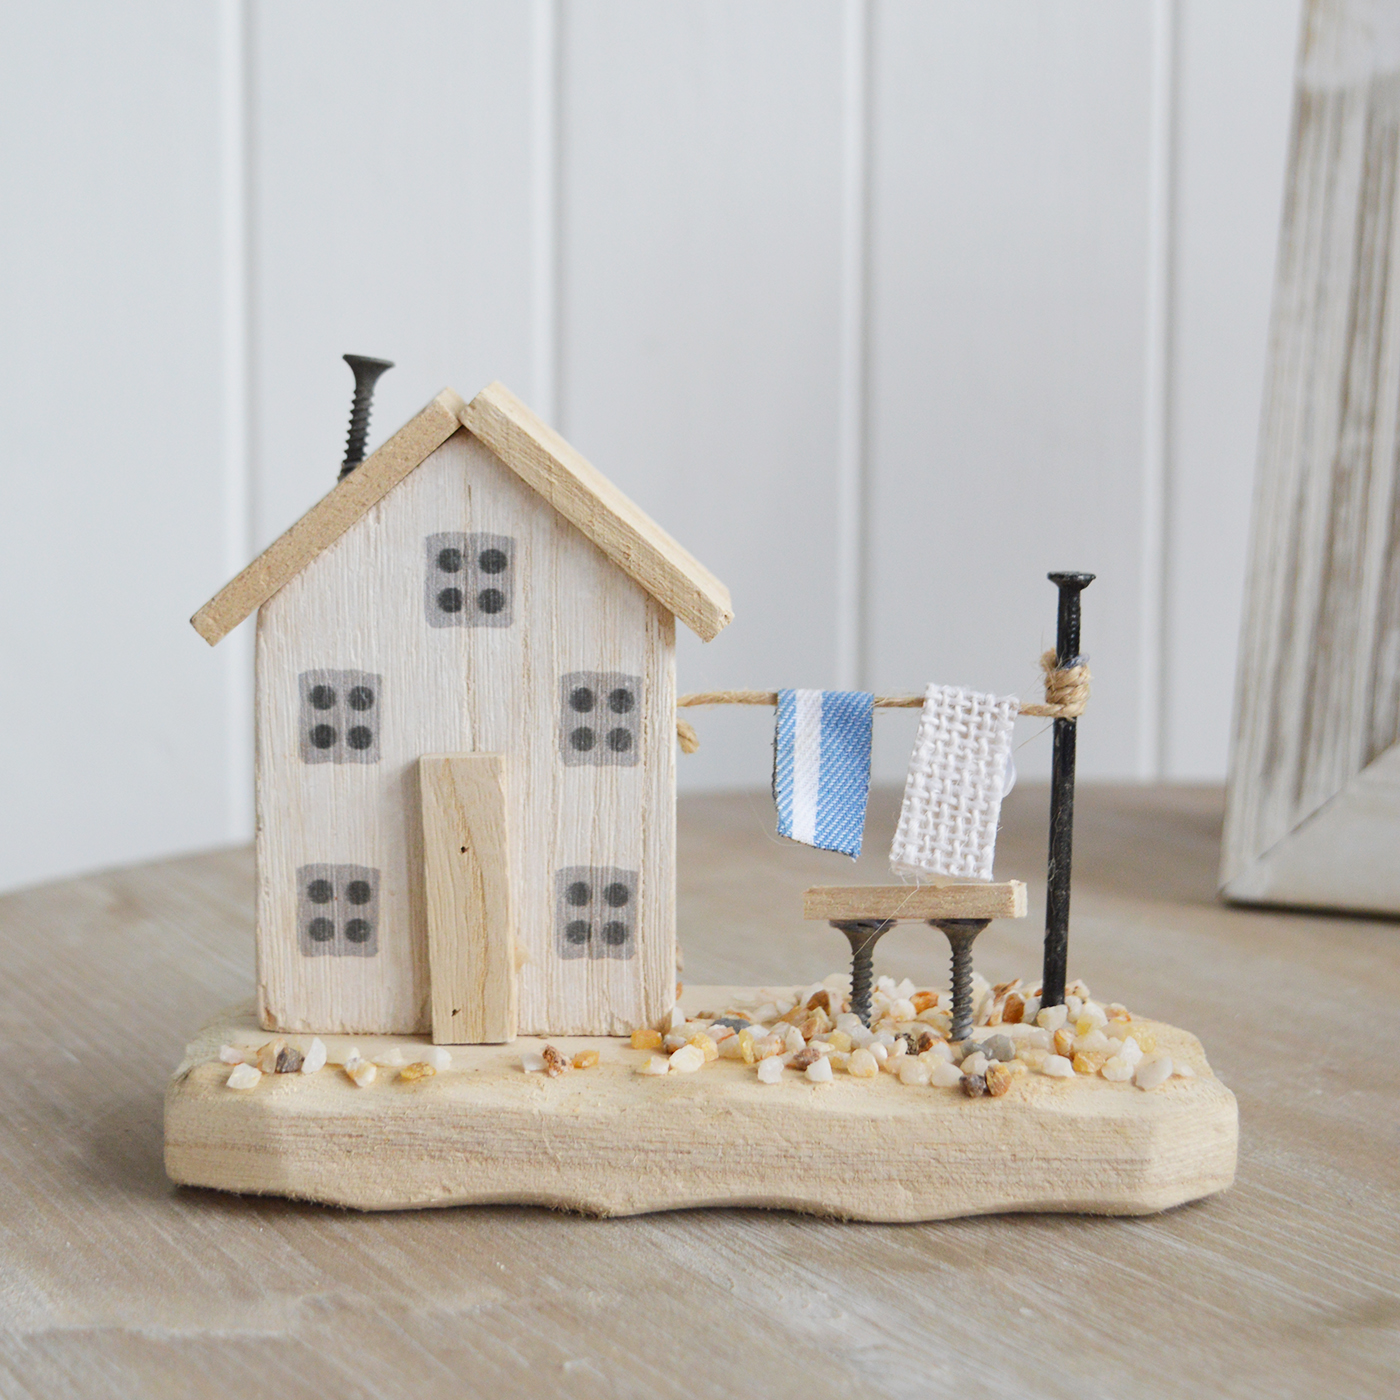 Driftwood Wooden houses - New England Coastal and Beach House Style Home Decor